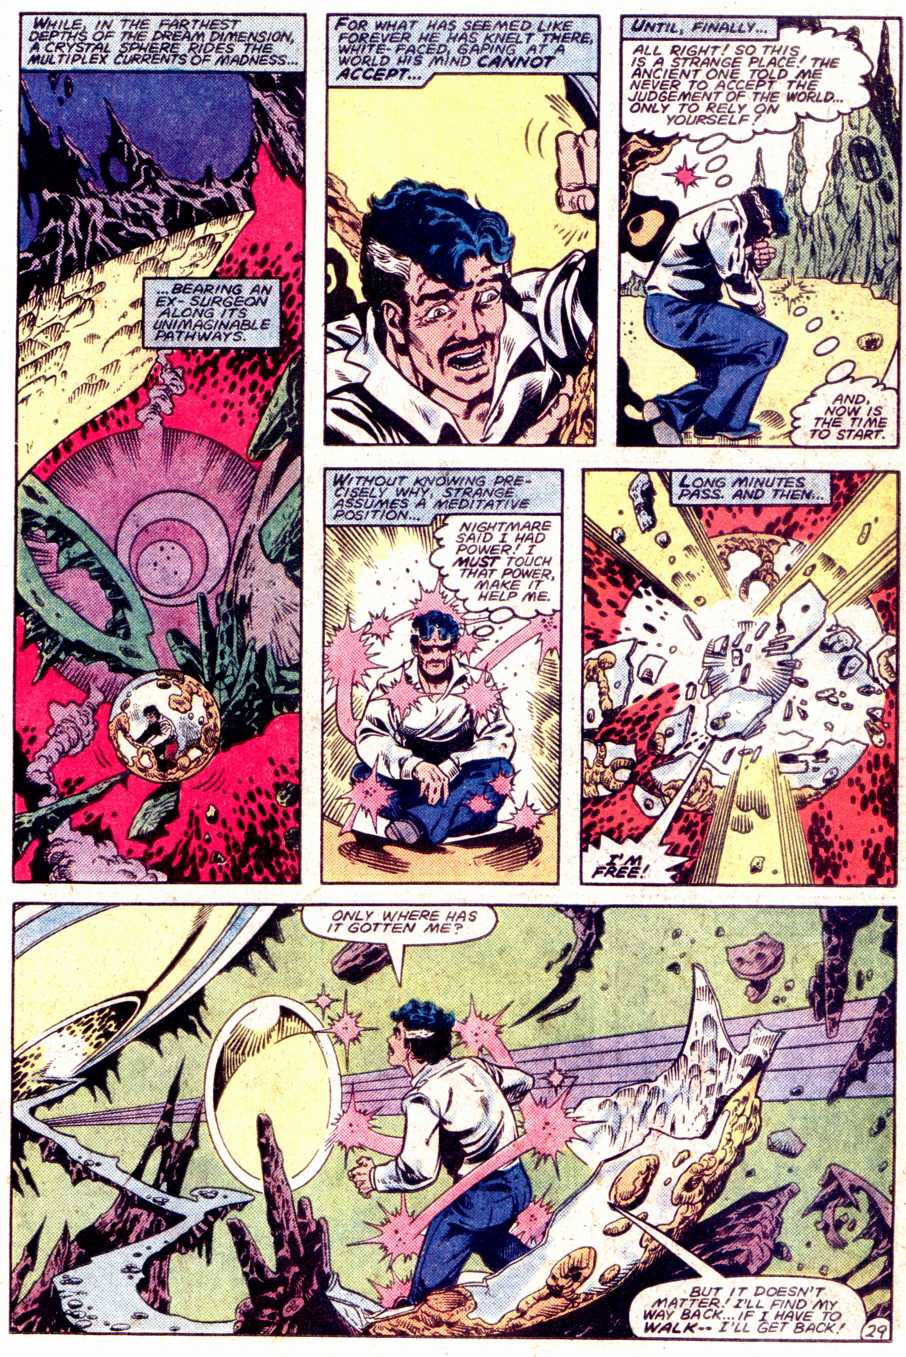 What If? (1977) issue 40 - Dr Strange had not become master of The mystic arts - Page 30